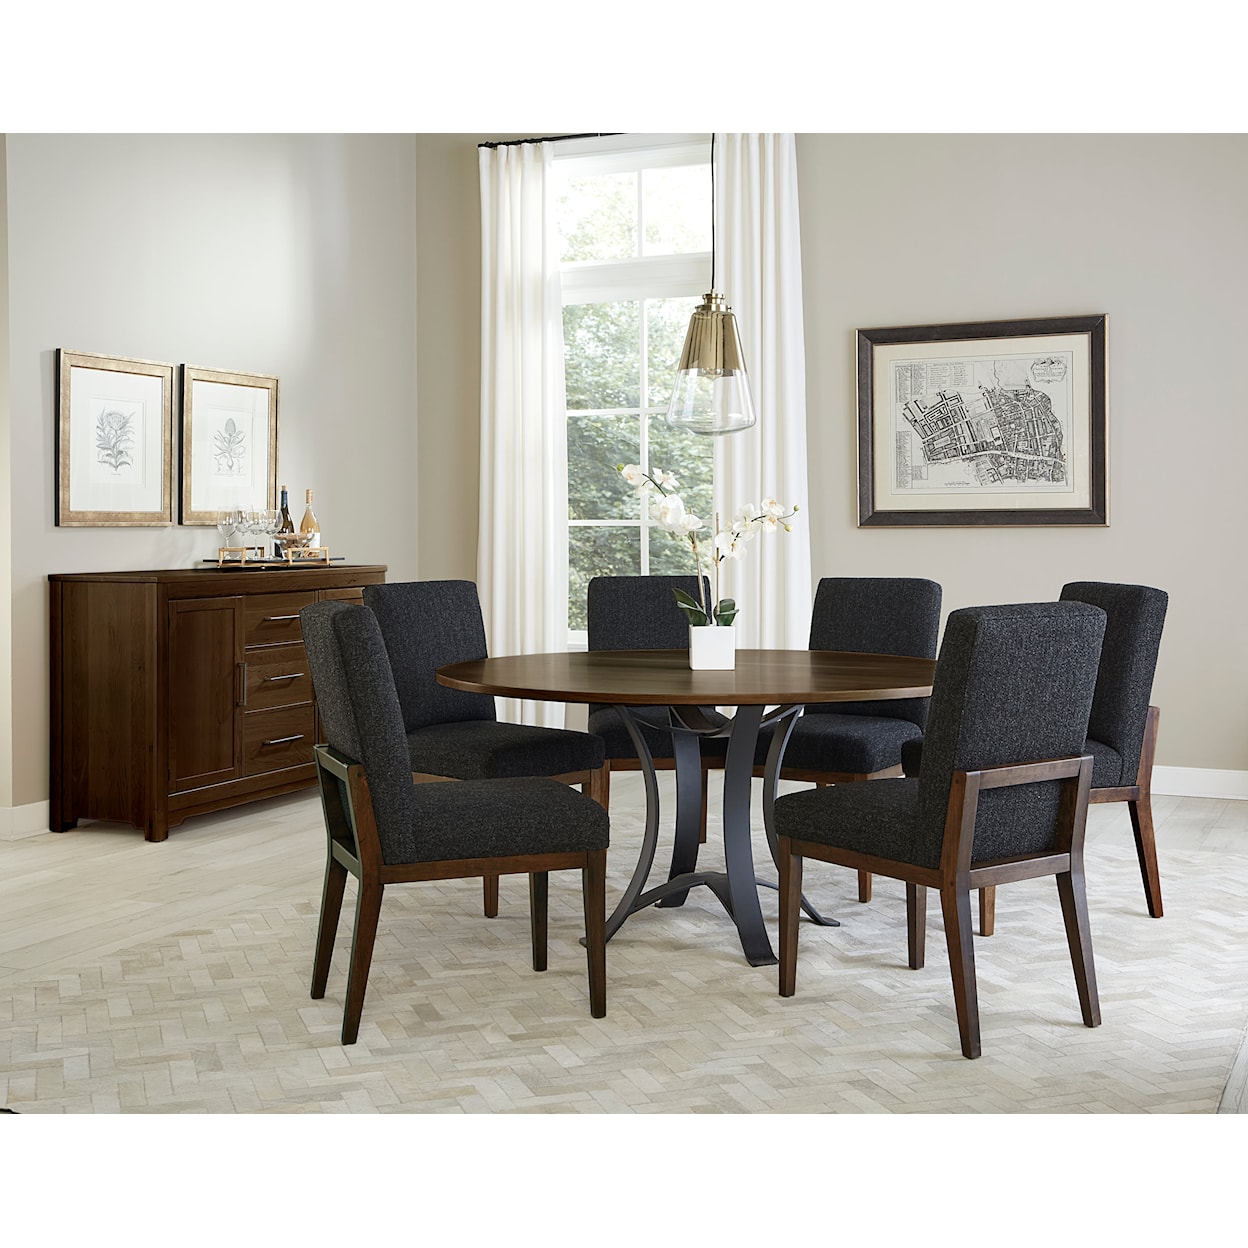 Virginia House Crafted Cherry - Dark 60" Round Dining Table